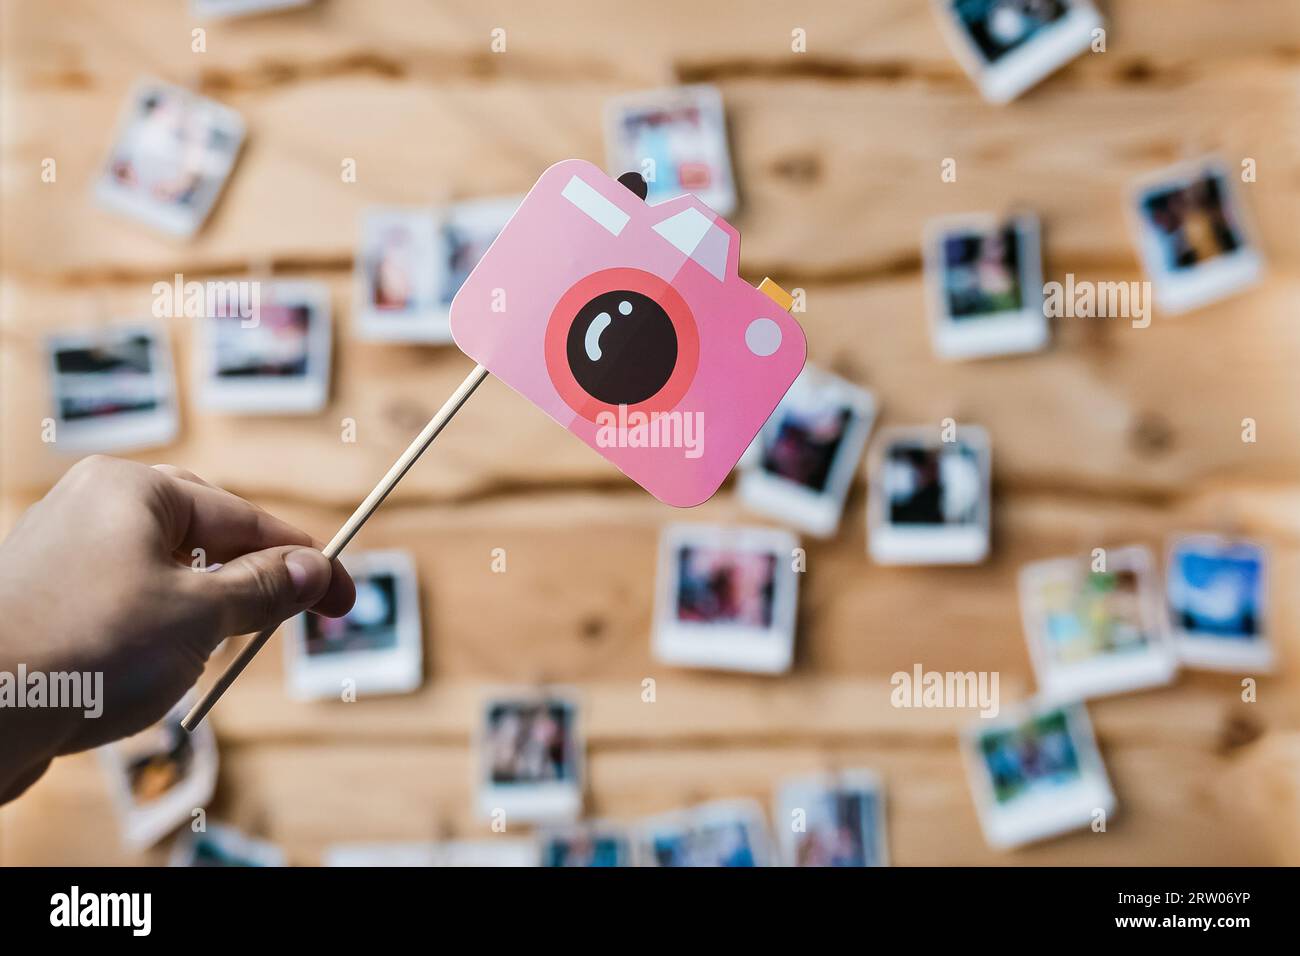 A photo object props, a photo booth, a camera on a stick, against the background of many photos. Stock Photo